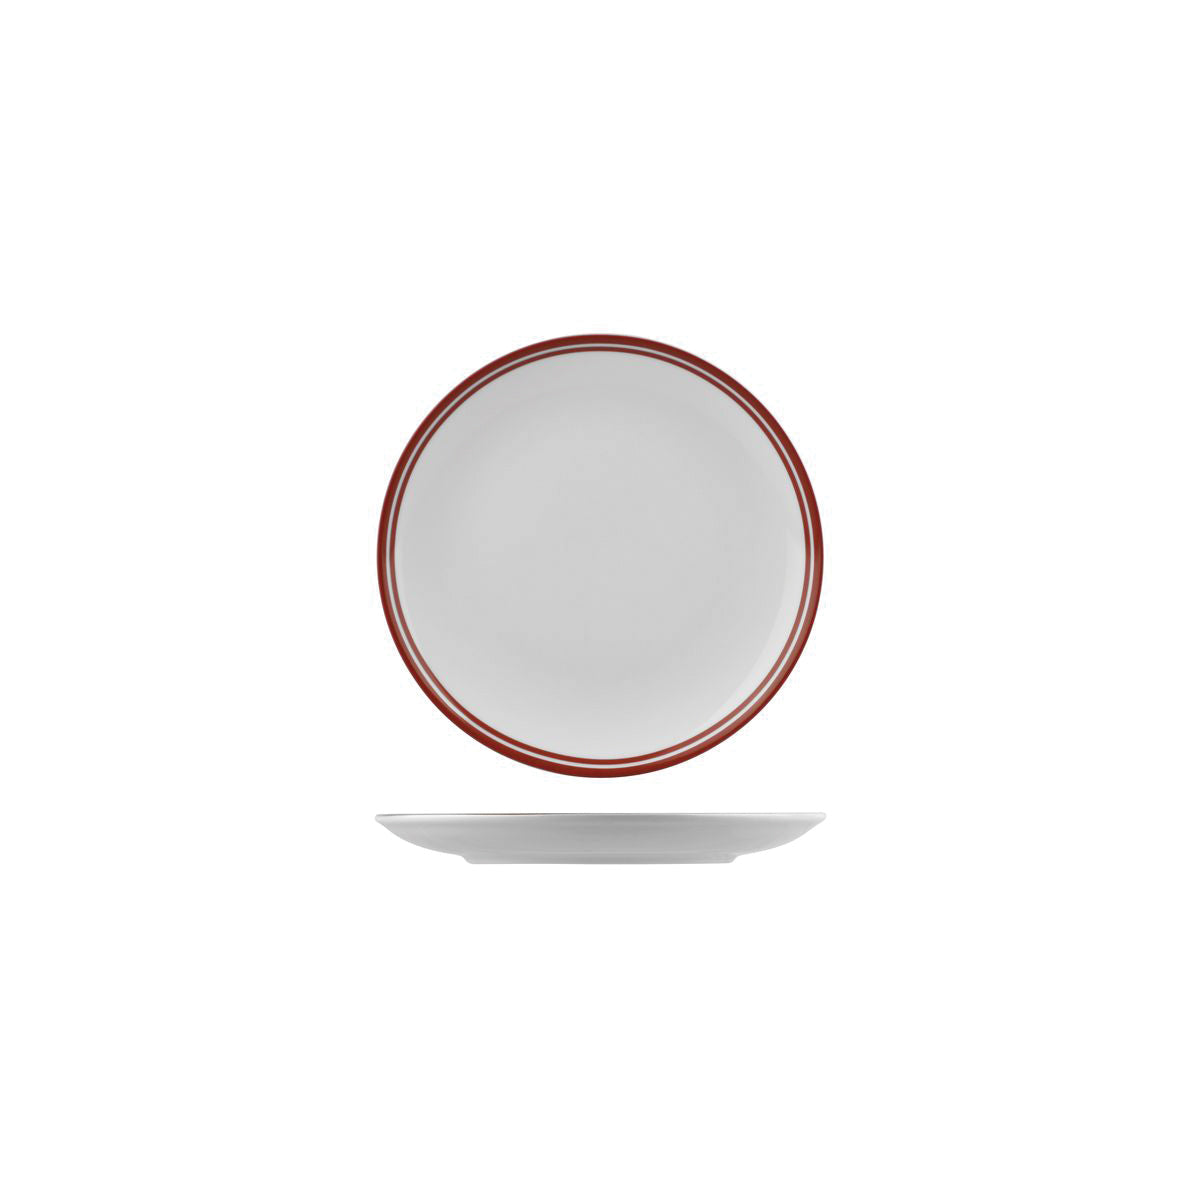 Round Coupe Plate Red, 180Mm, Nano Cru from Rak Porcelain. made out of Porcelain and sold in boxes of 24. Hospitality quality at wholesale price with The Flying Fork! 